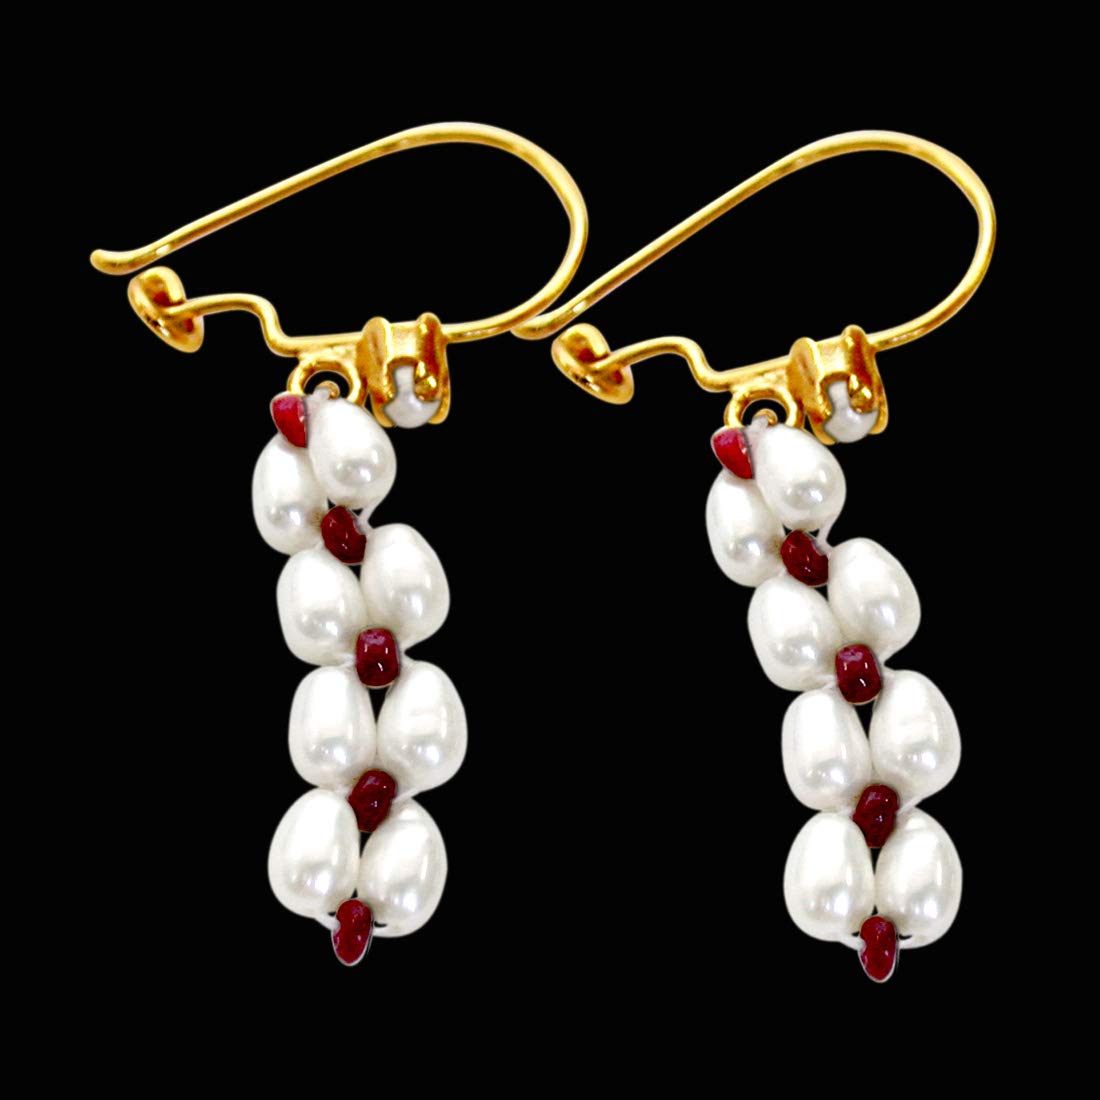 Pearl Ruby Ecstasy - Real Rice Pearl & Red Ruby Beads Hanging Earrings for Women (SE70)